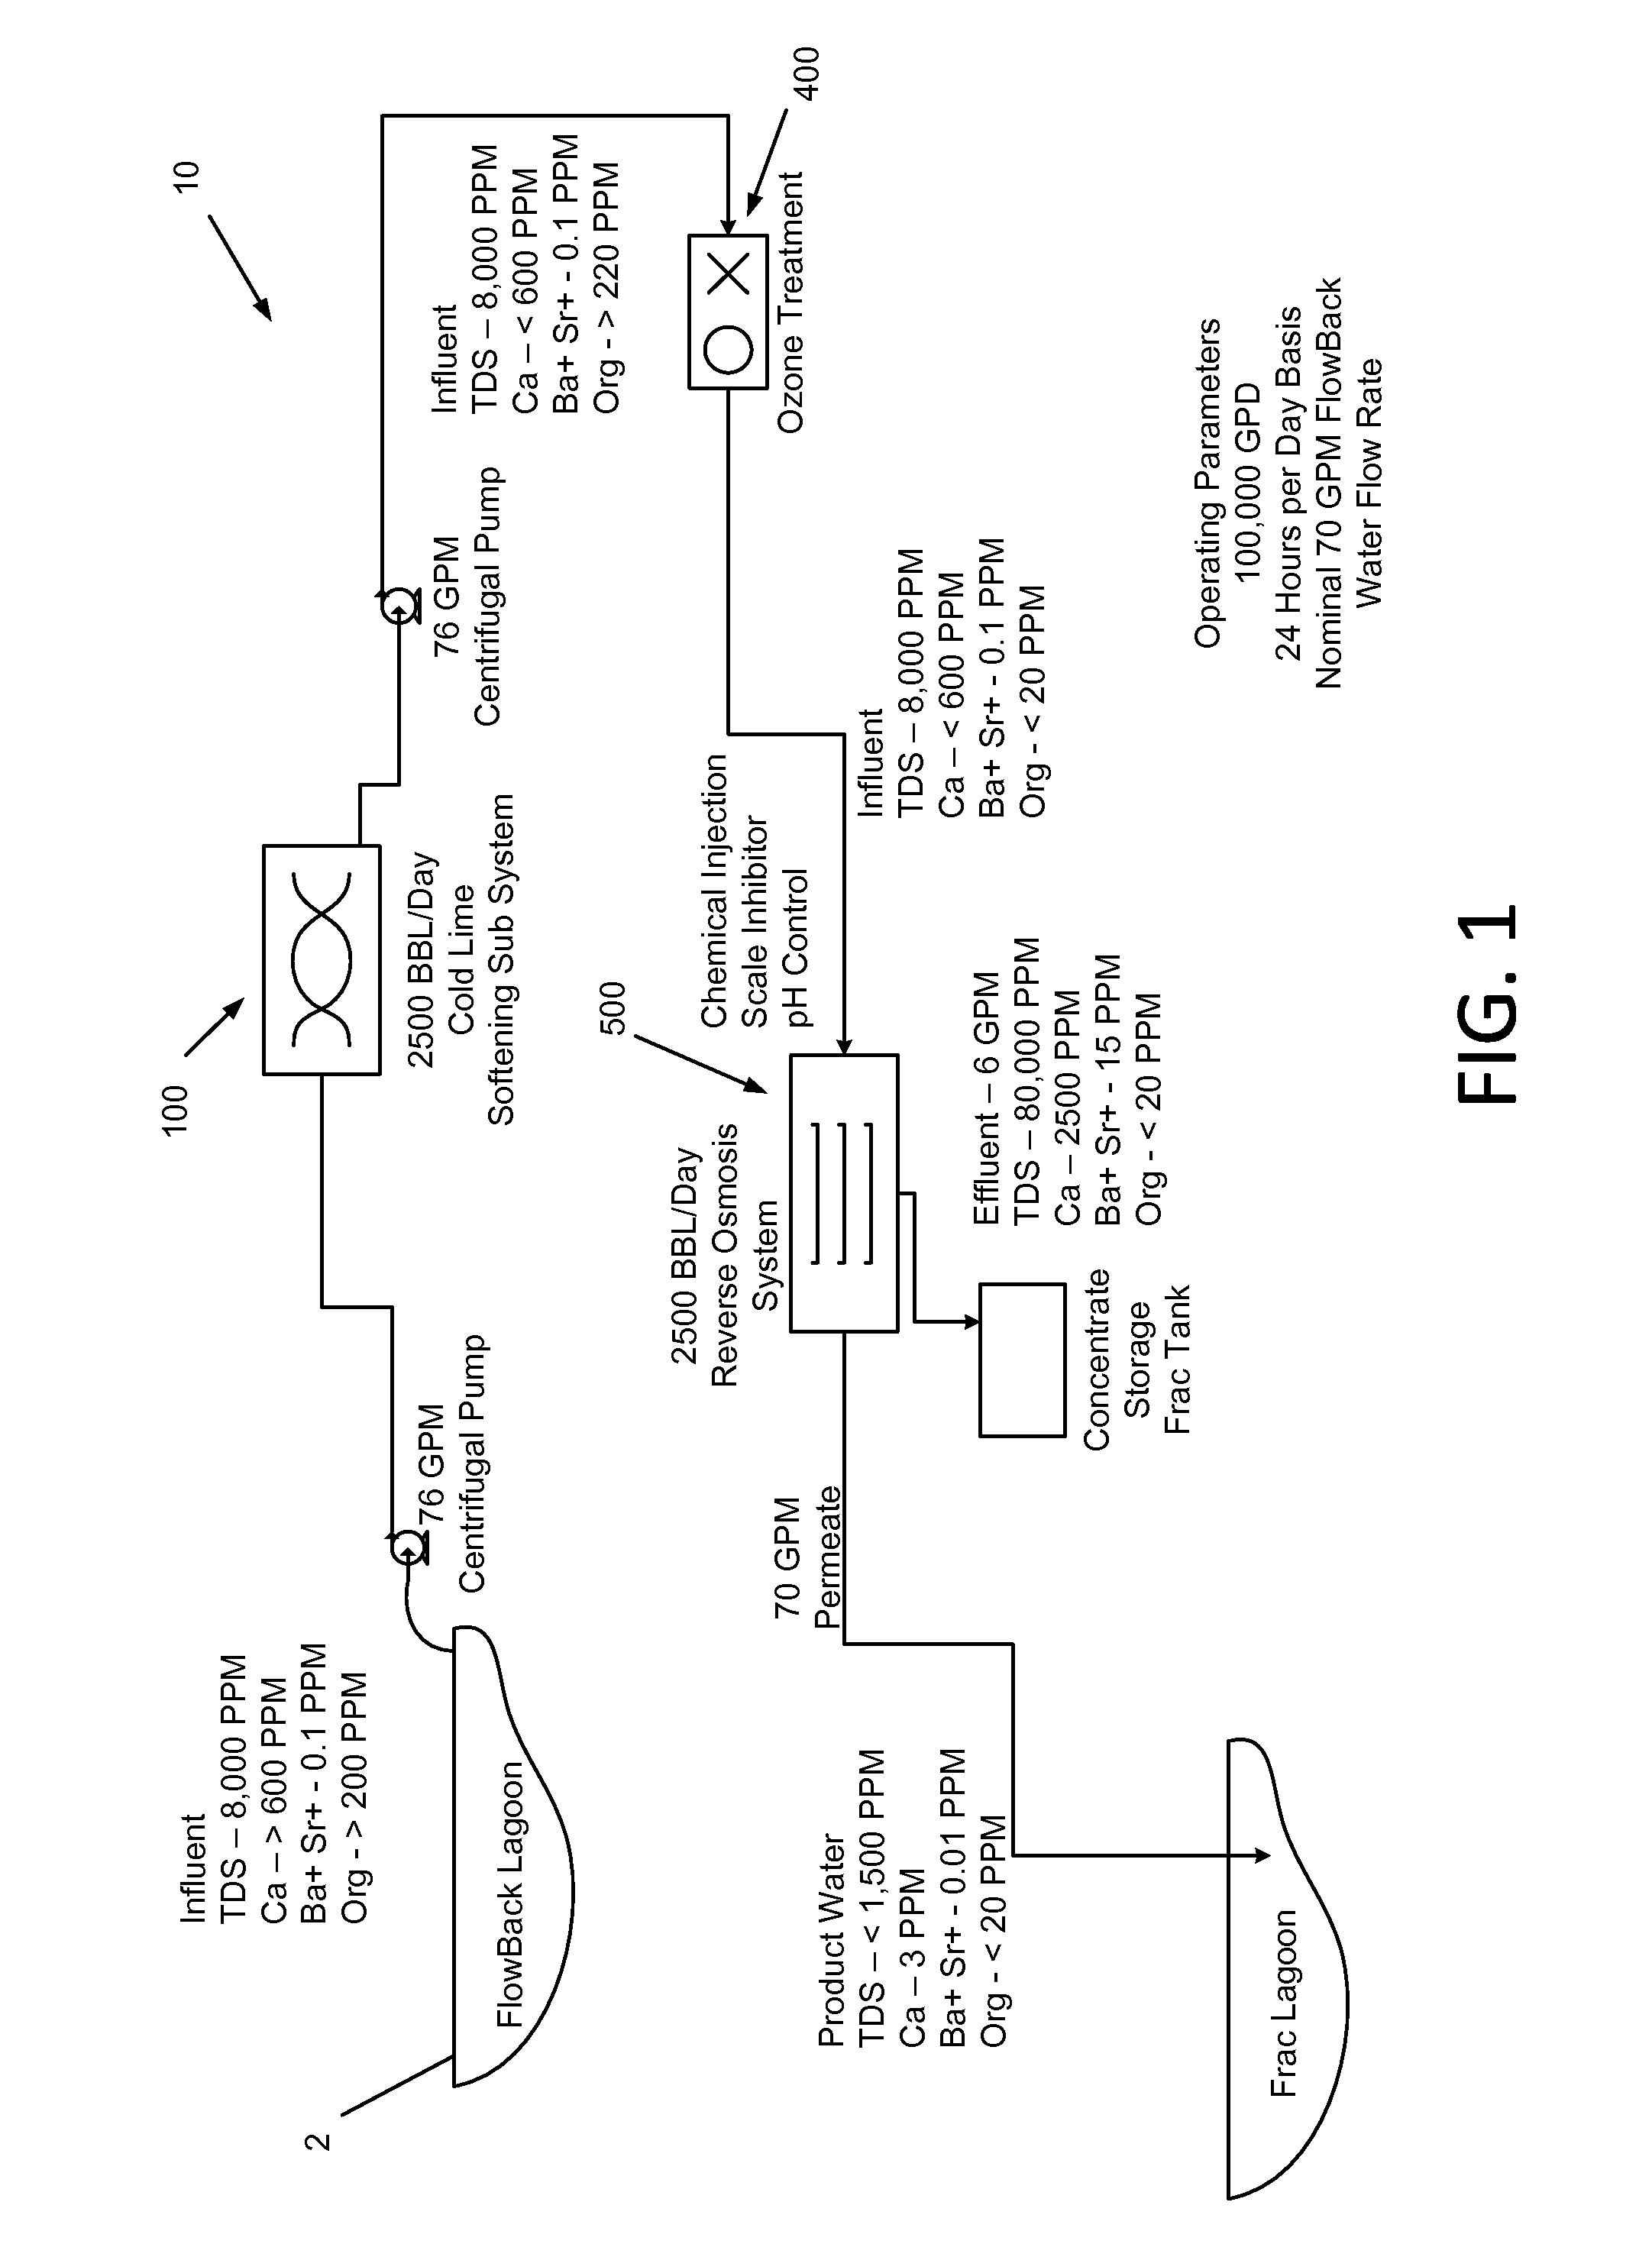 Method and apparatus for treating natural gas and oil well waste waters for removal of contaminants and dissolved solids